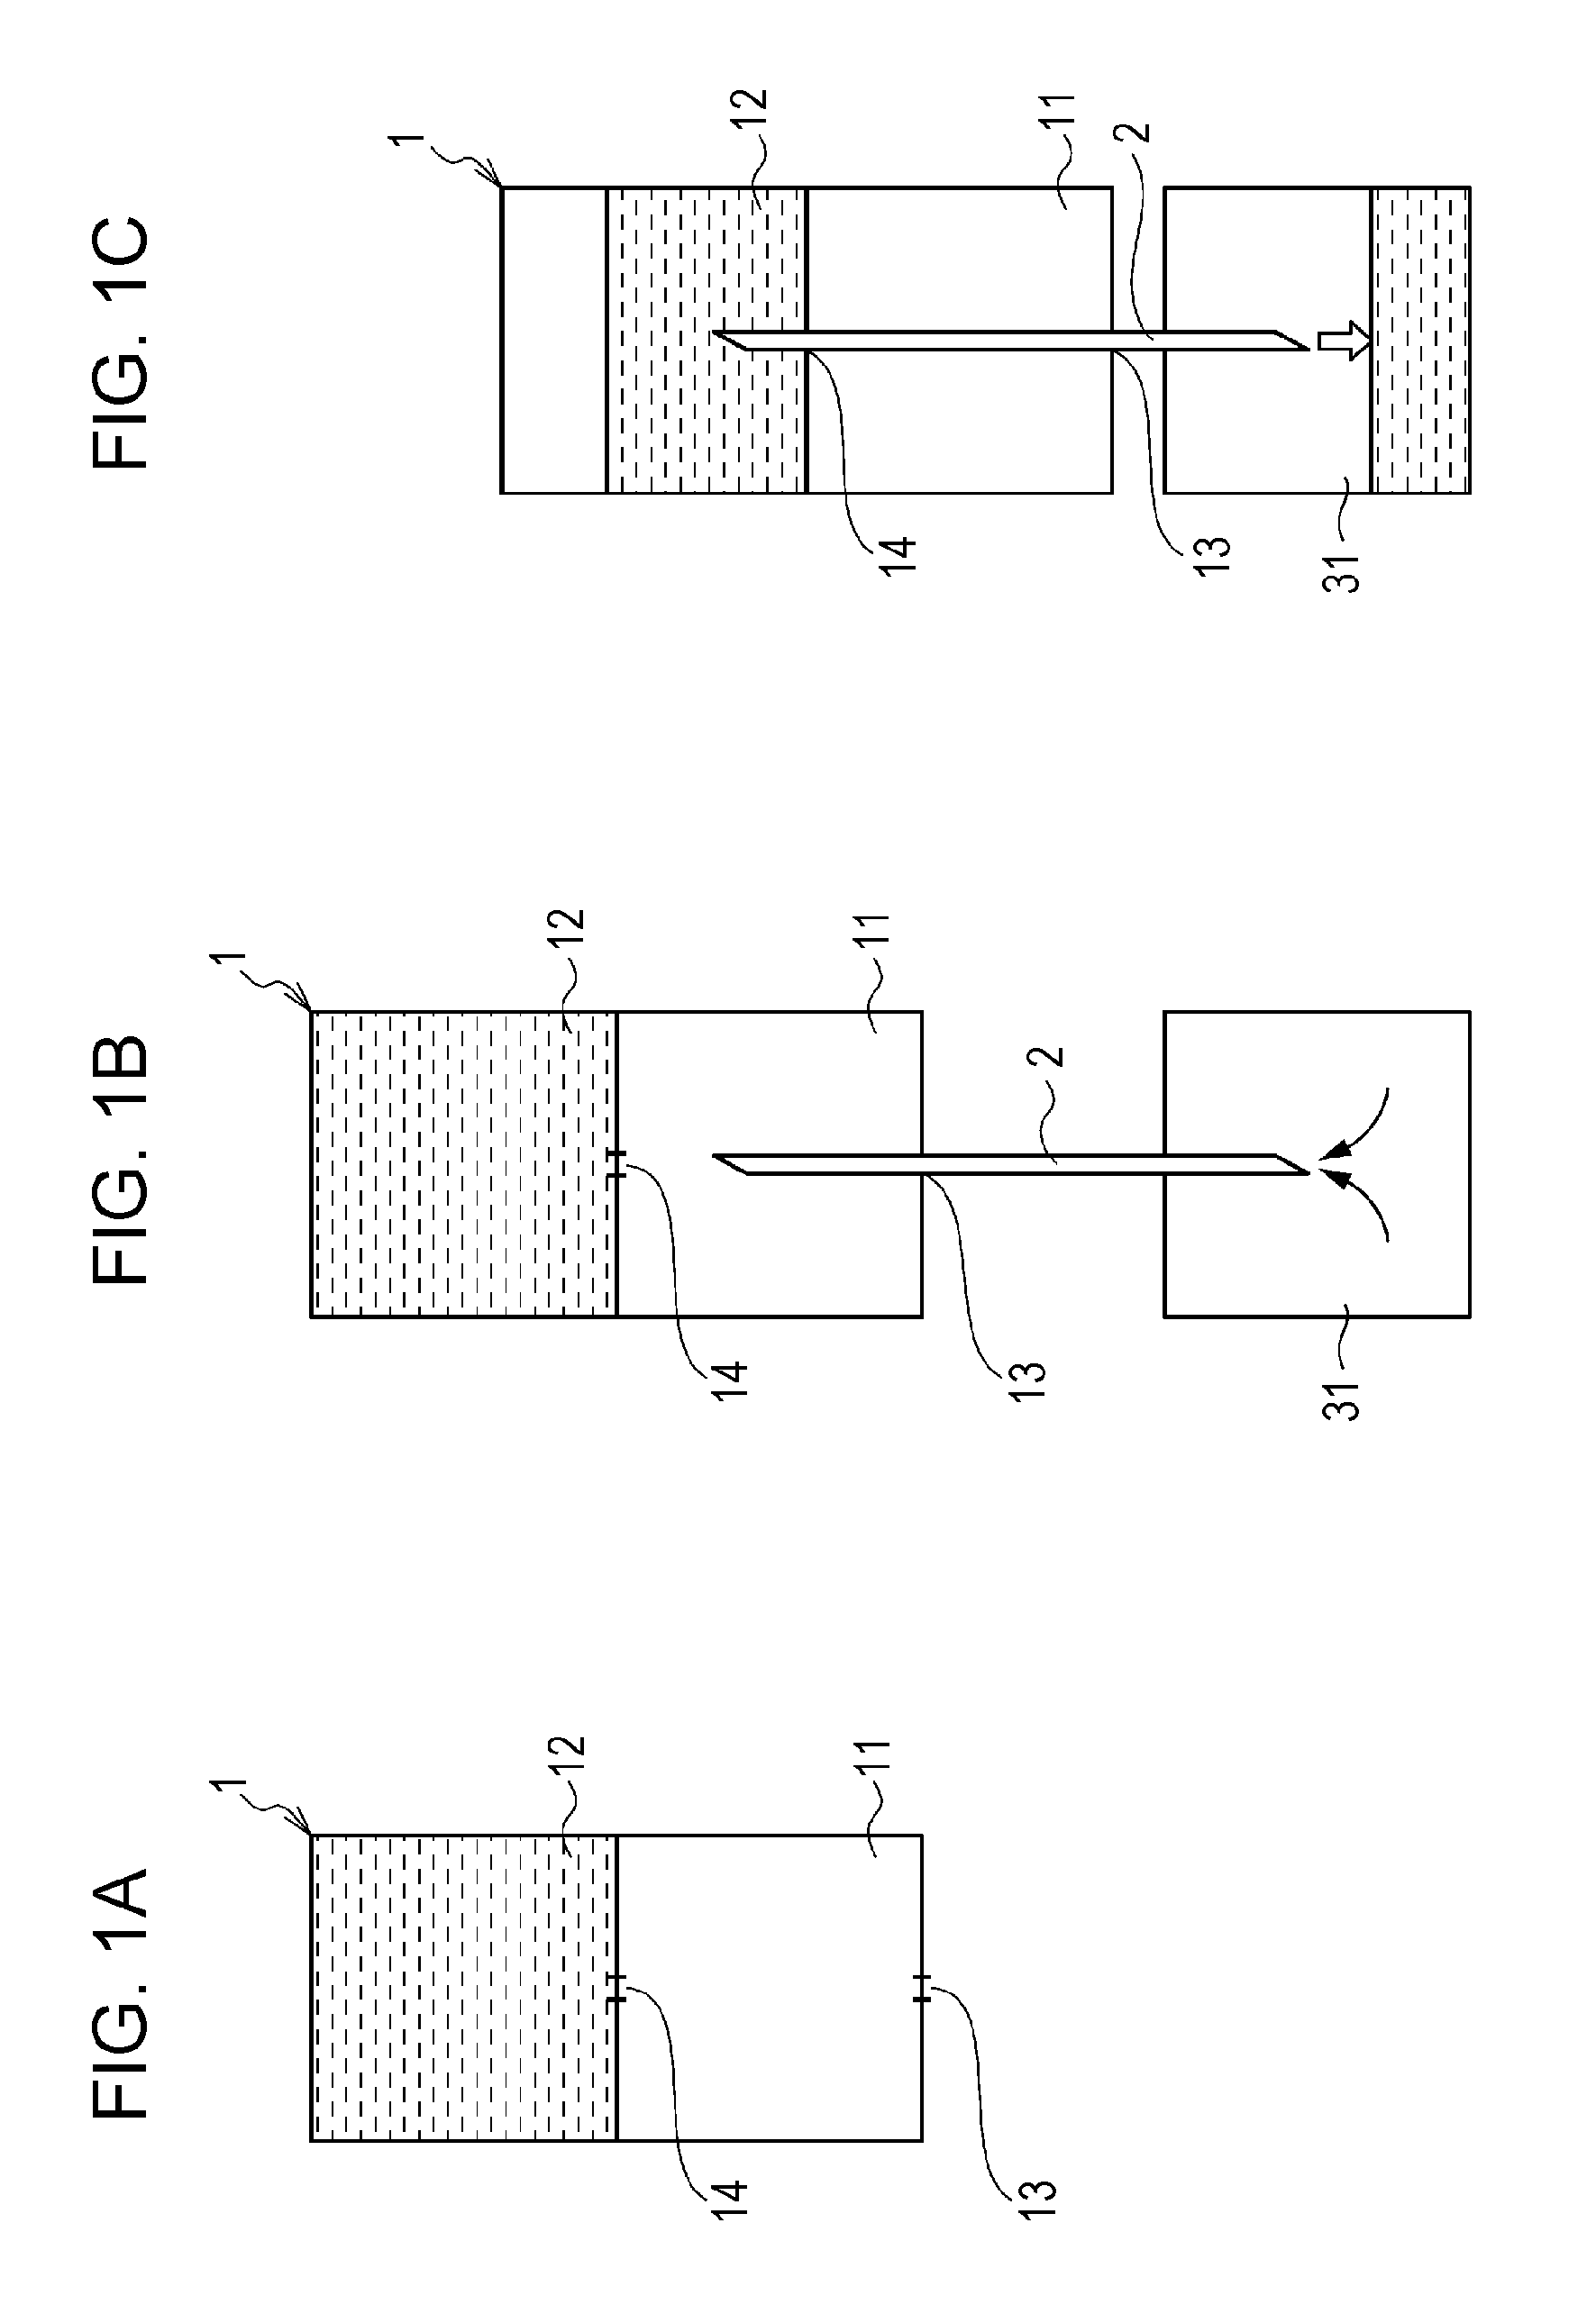 Sample liquid supply container, sample liquid supply container set, and microchip set